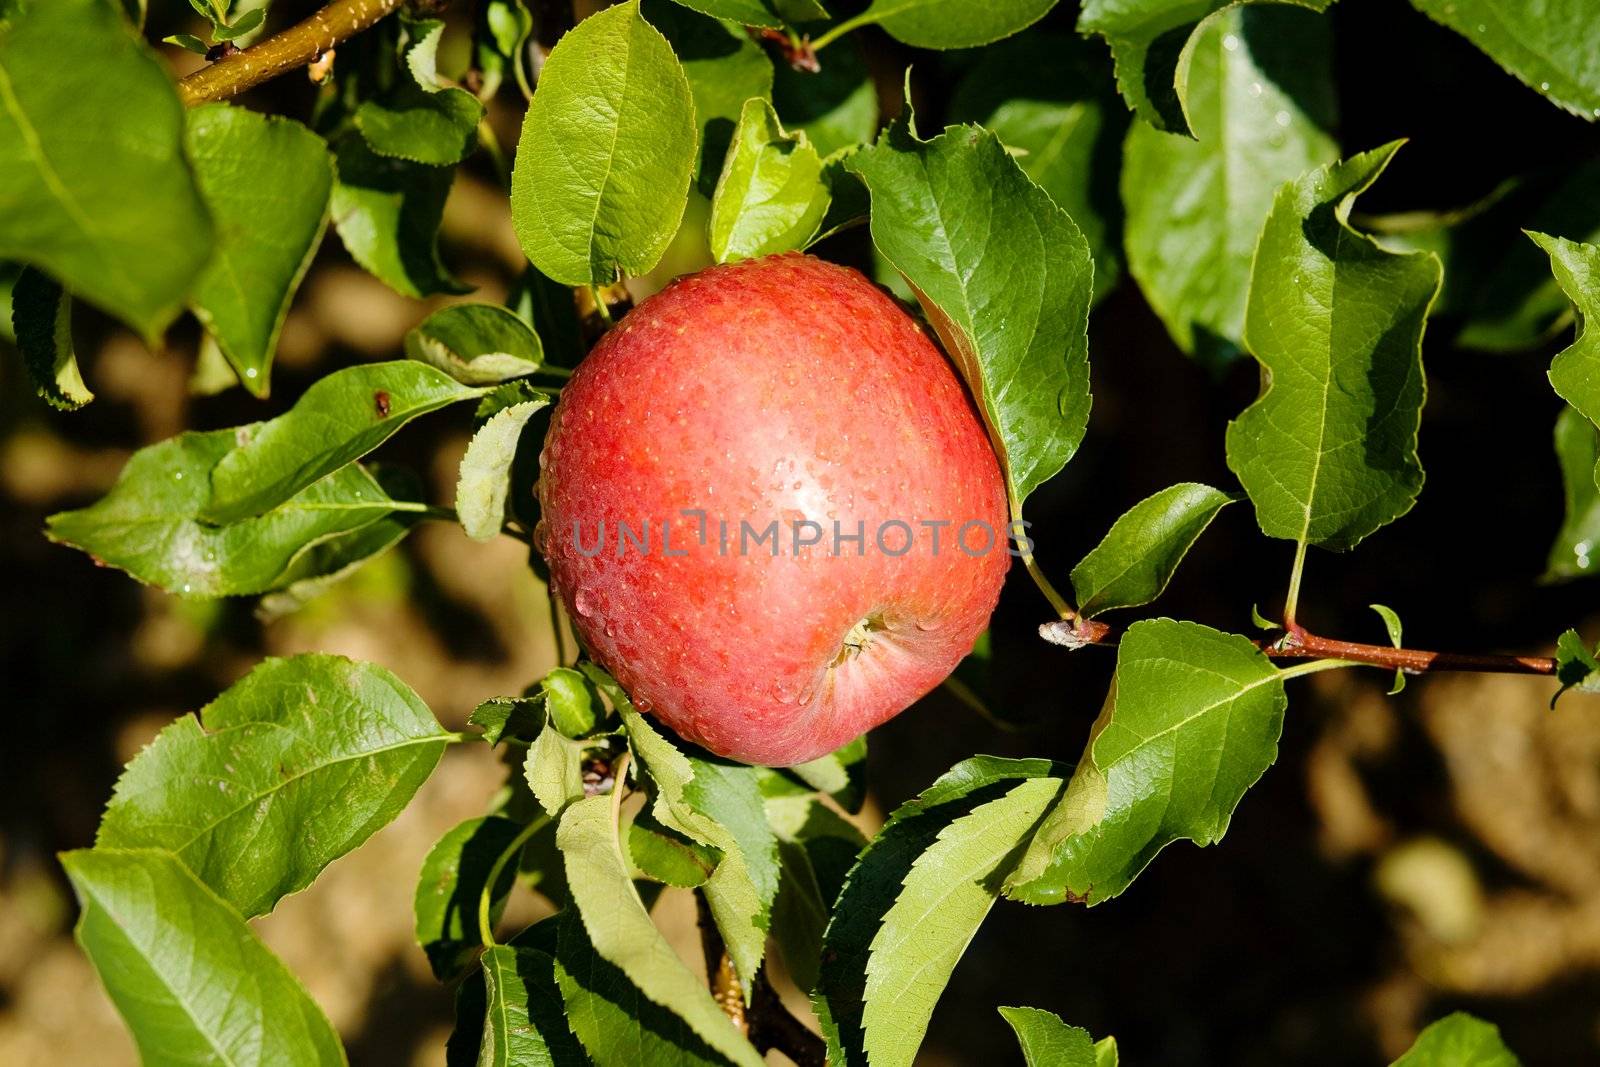 An image of red apple on the tree